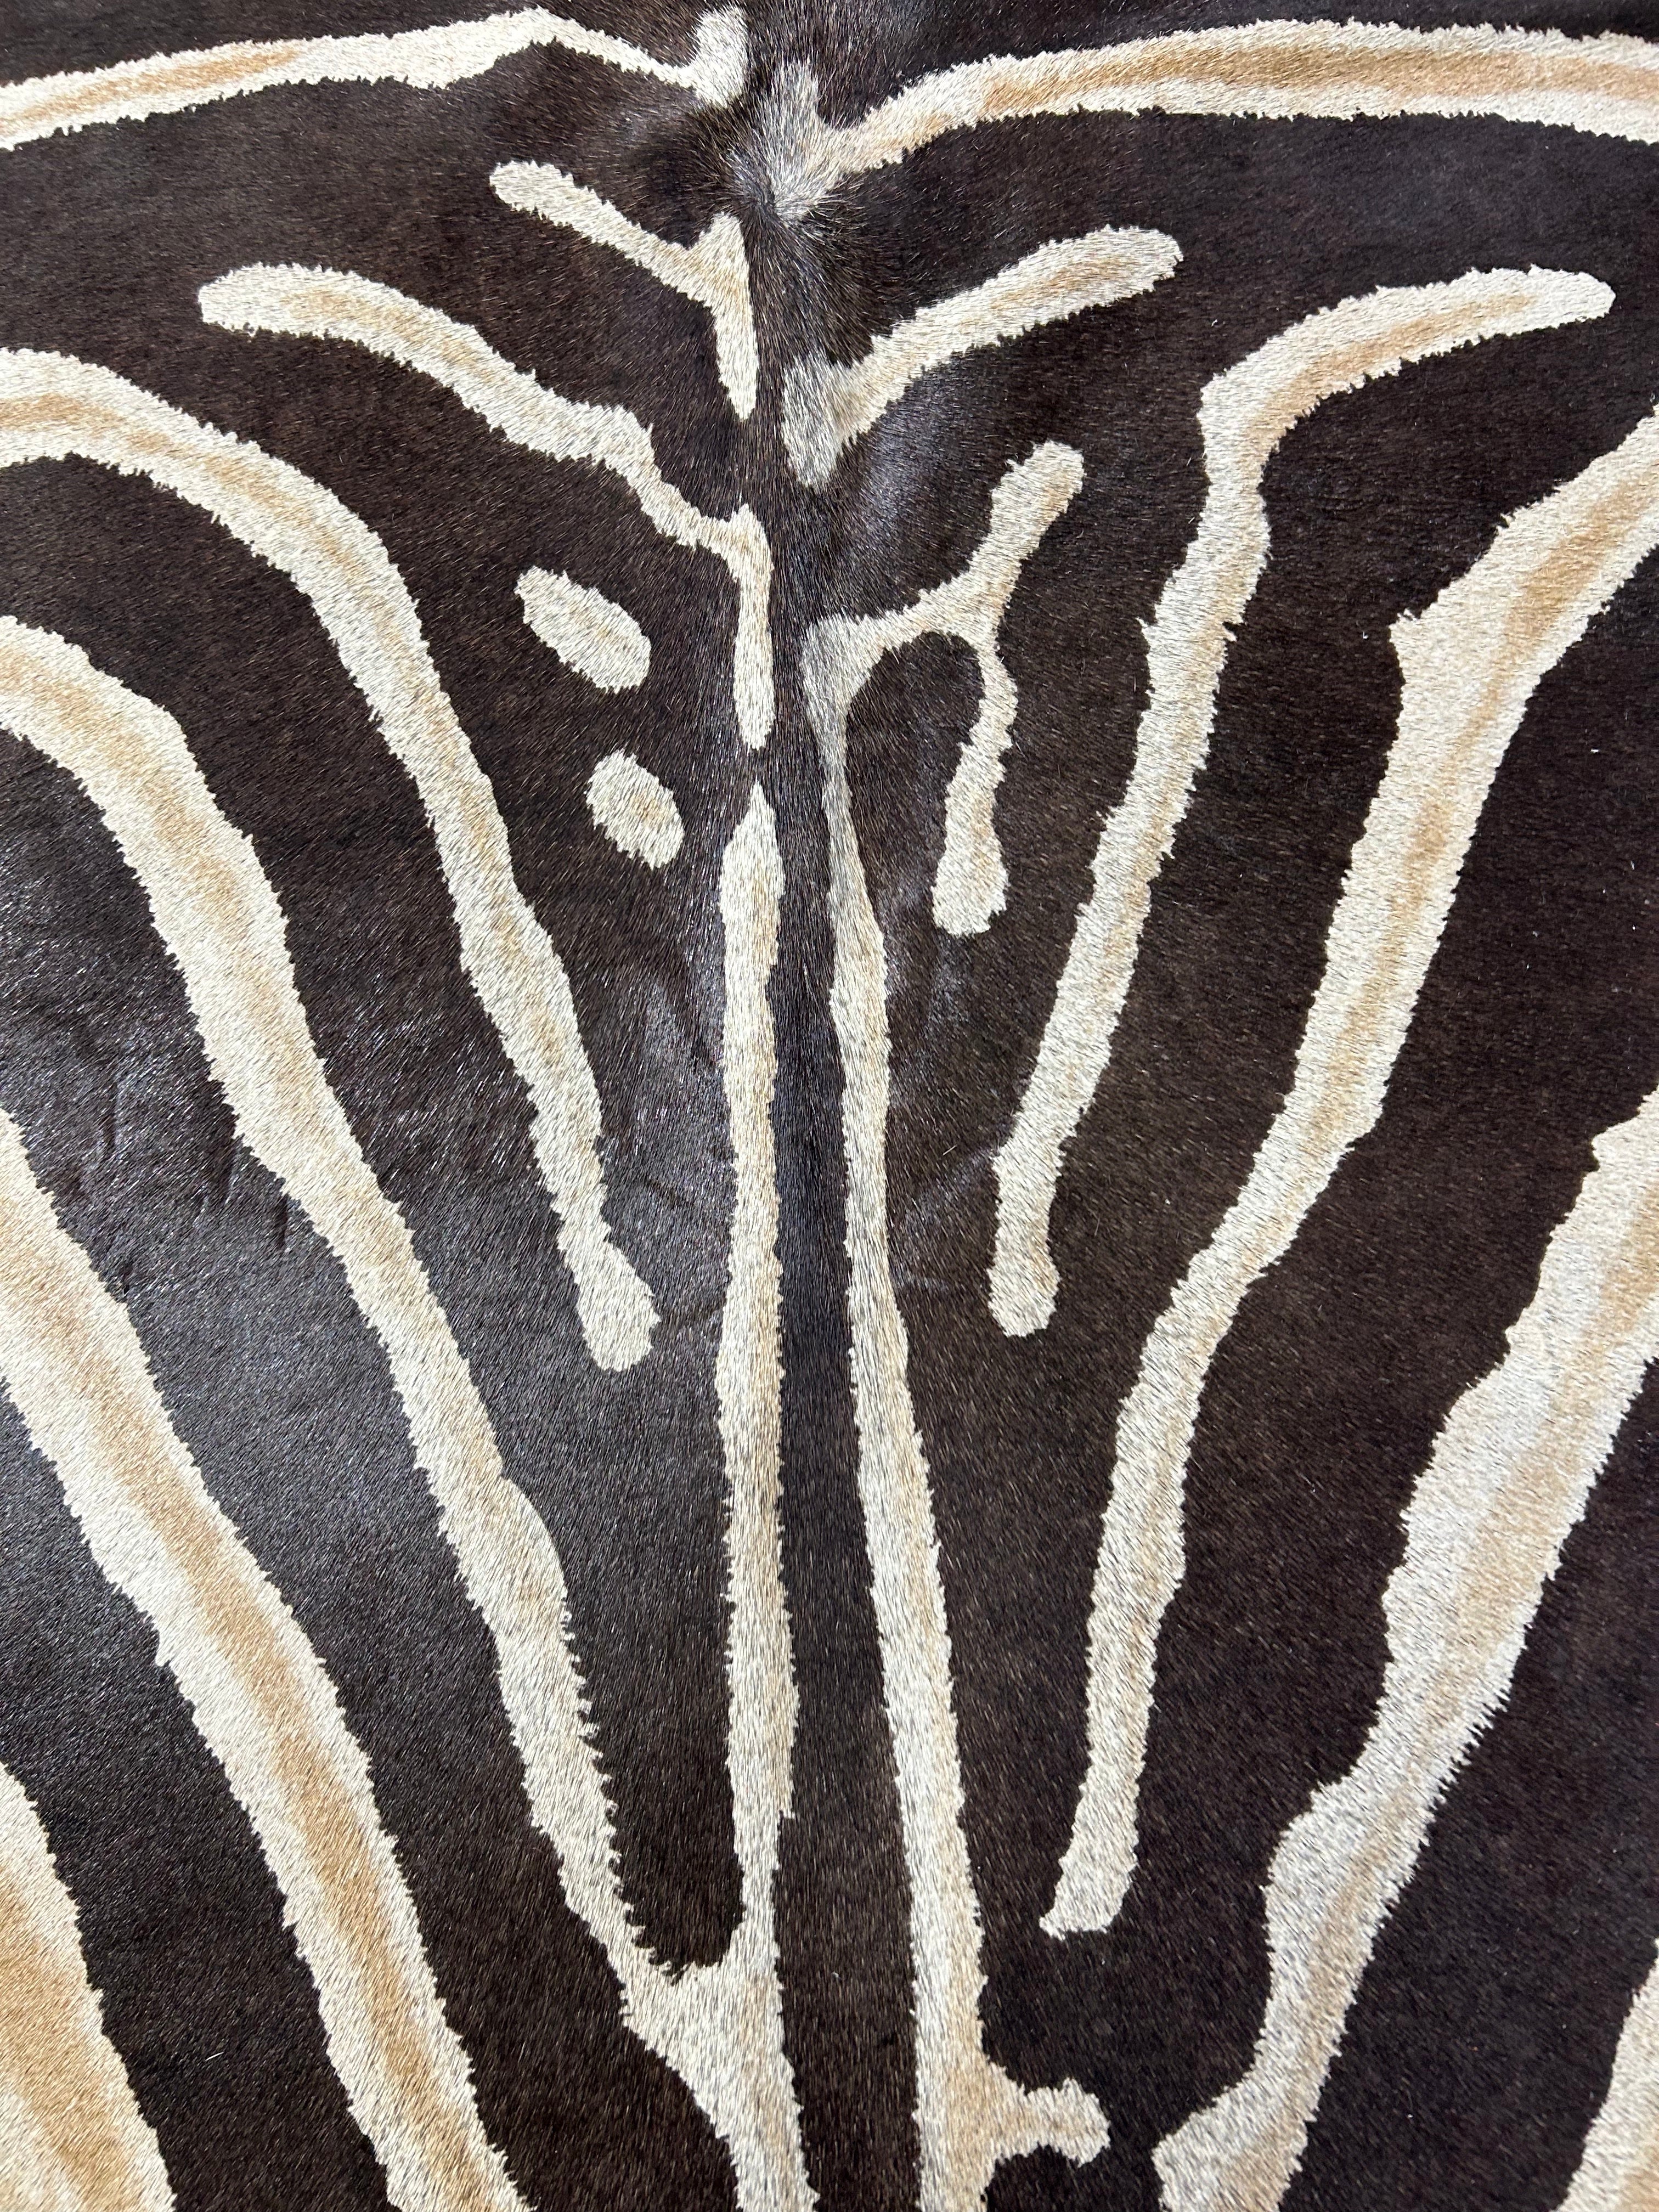 Genuine Zebra Print Cowhide Rug (inner stripes are light brown/hind right leg is missing print/a small patch) Size: 7.2x6 feet D-098